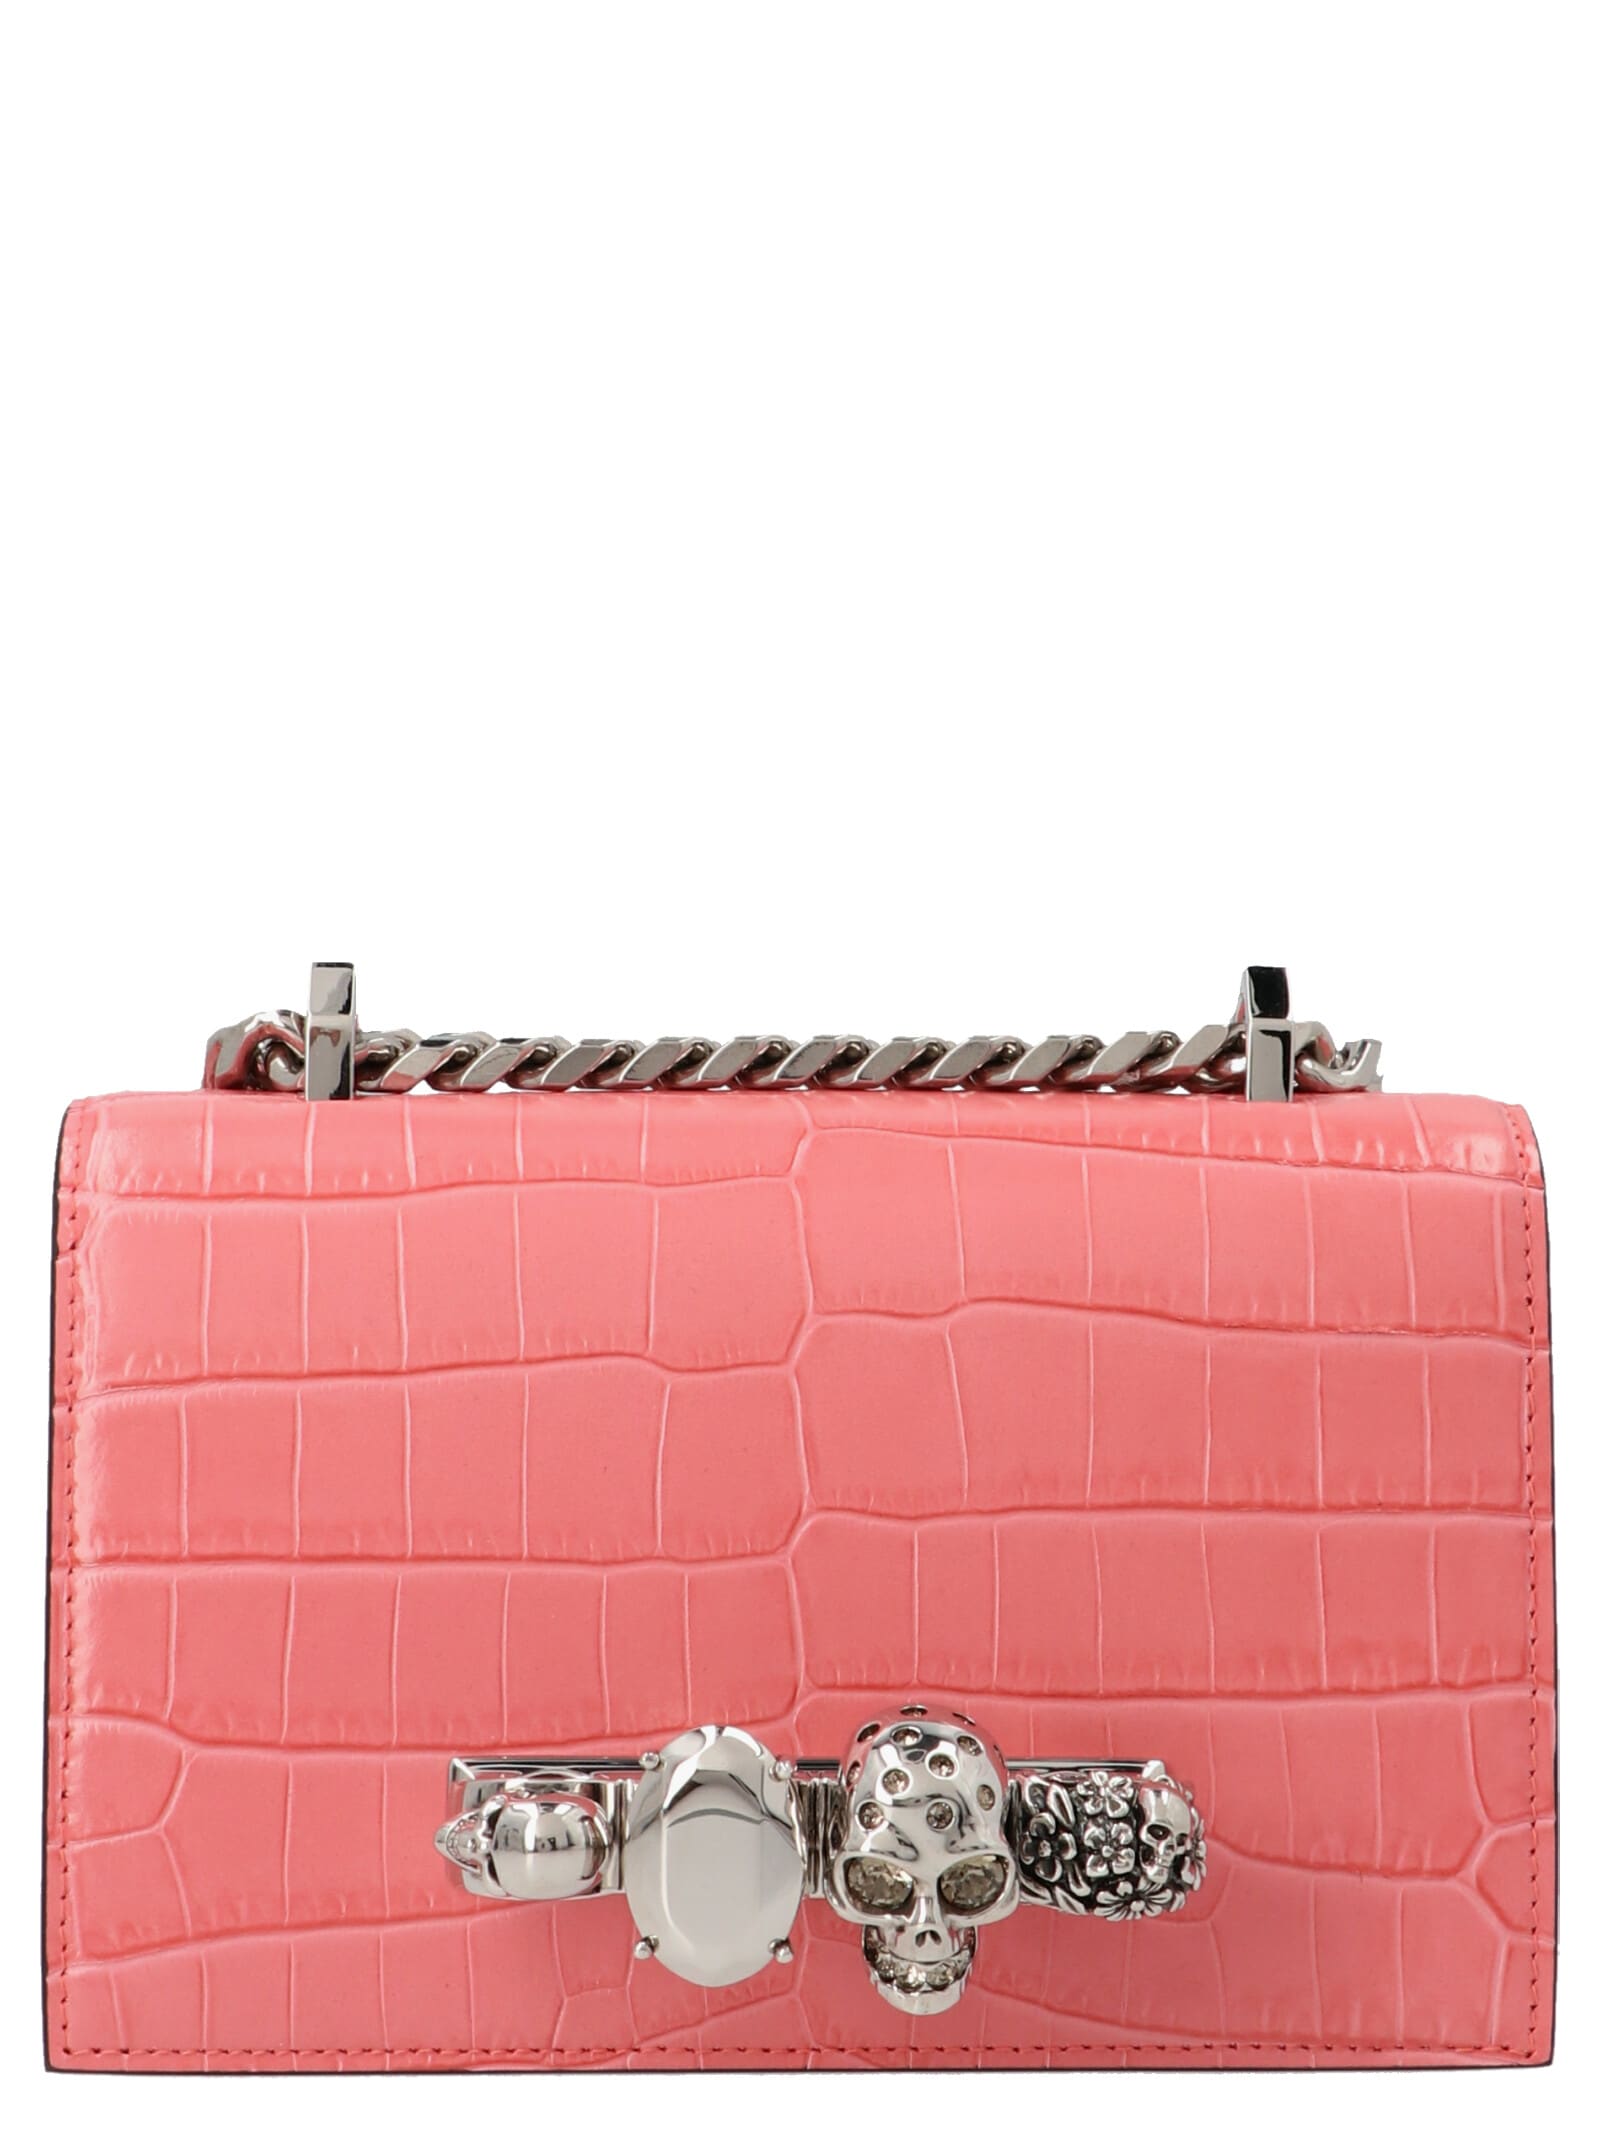 Womens Bags Satchel bags and purses Alexander McQueen Leather Pink Mini Jewelled Satchel 